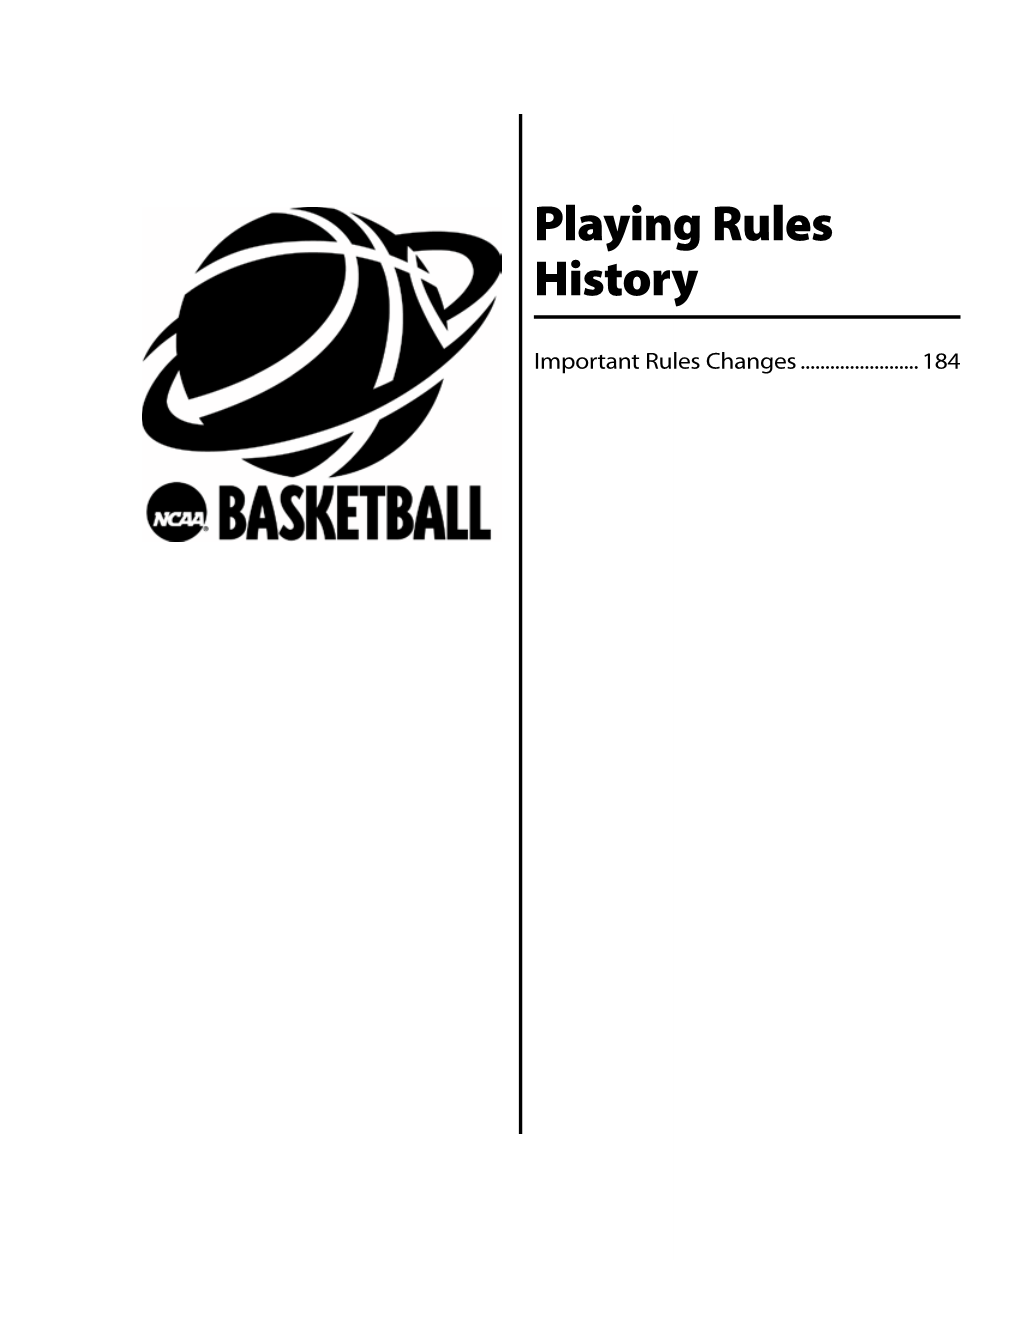 Playing Rules History